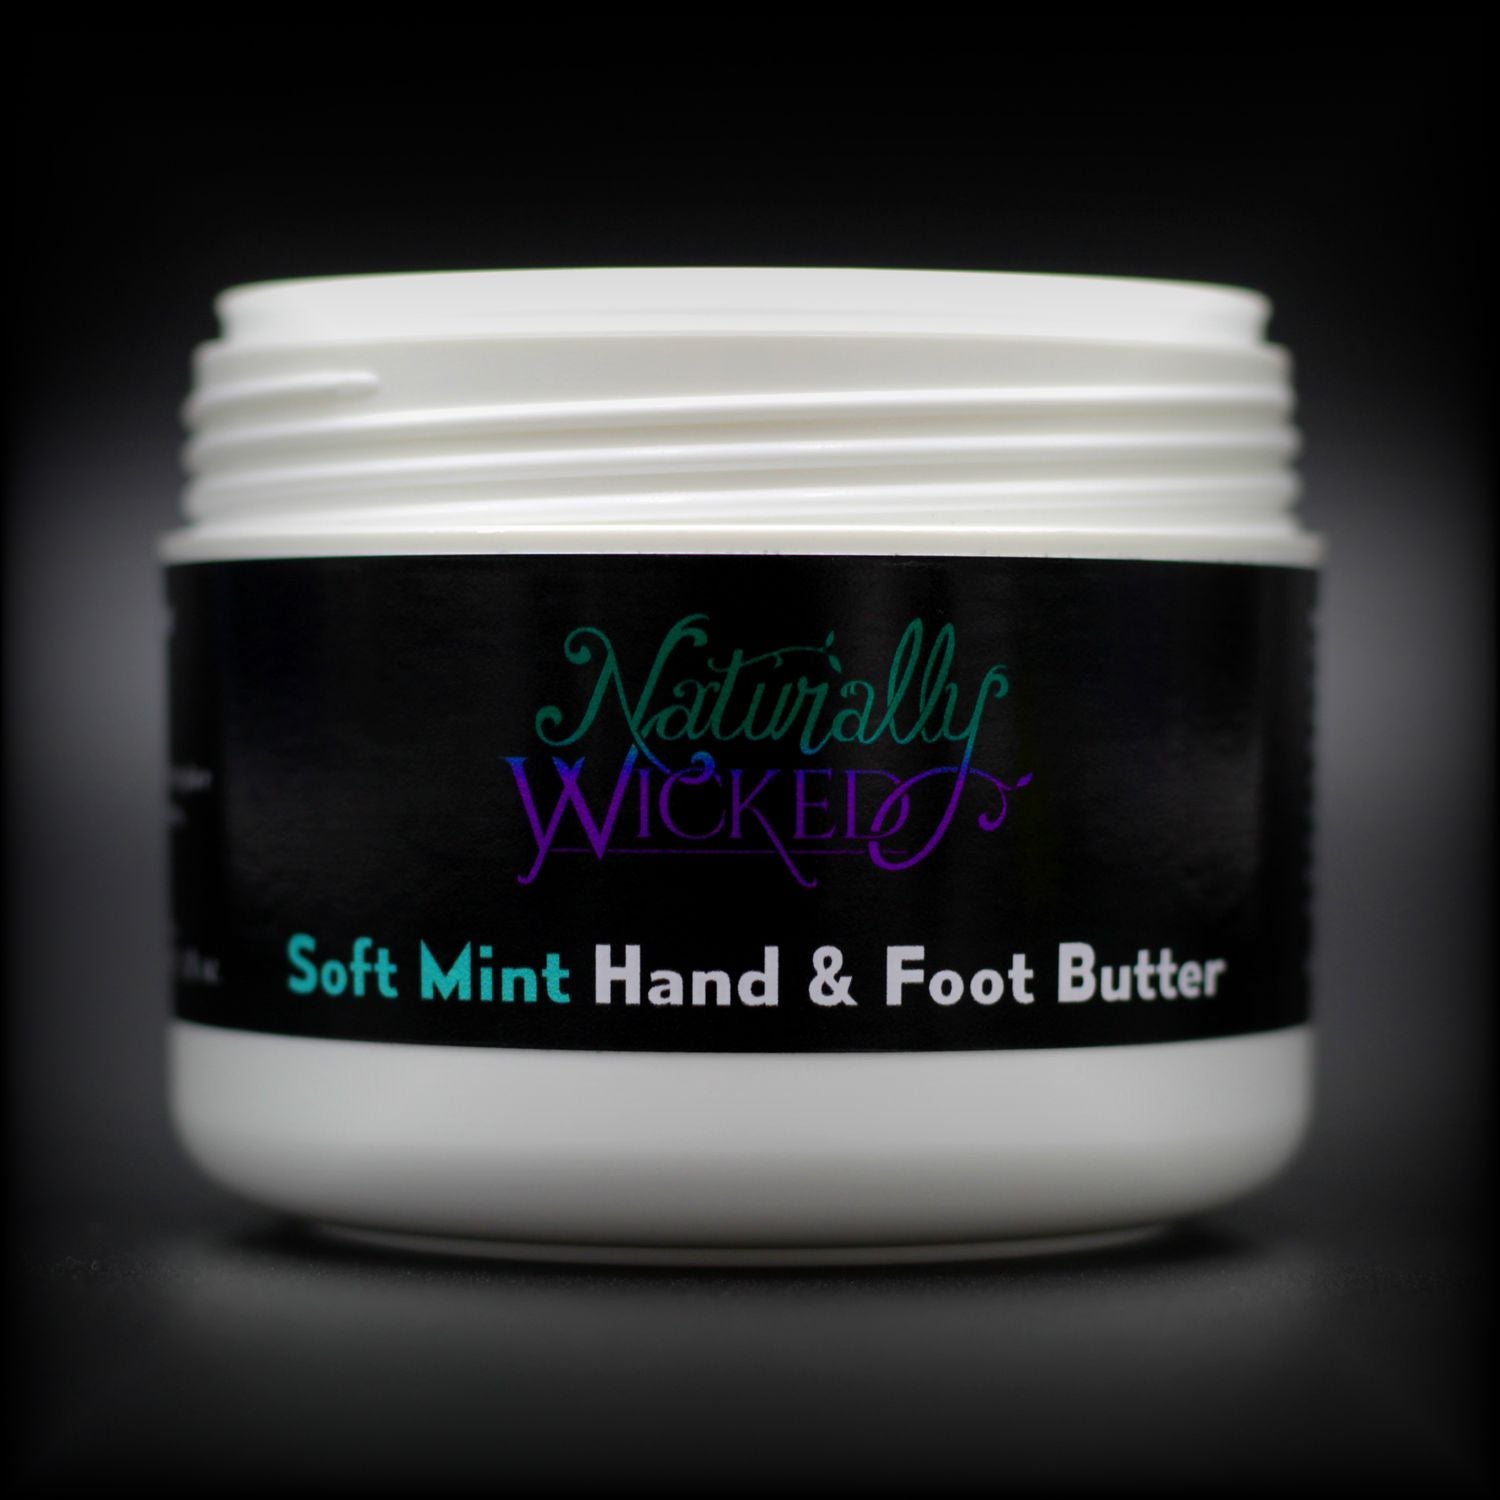 Naturally Wicked Soft Mint Hand & Foot Butter Container & Seal With Lid Removed